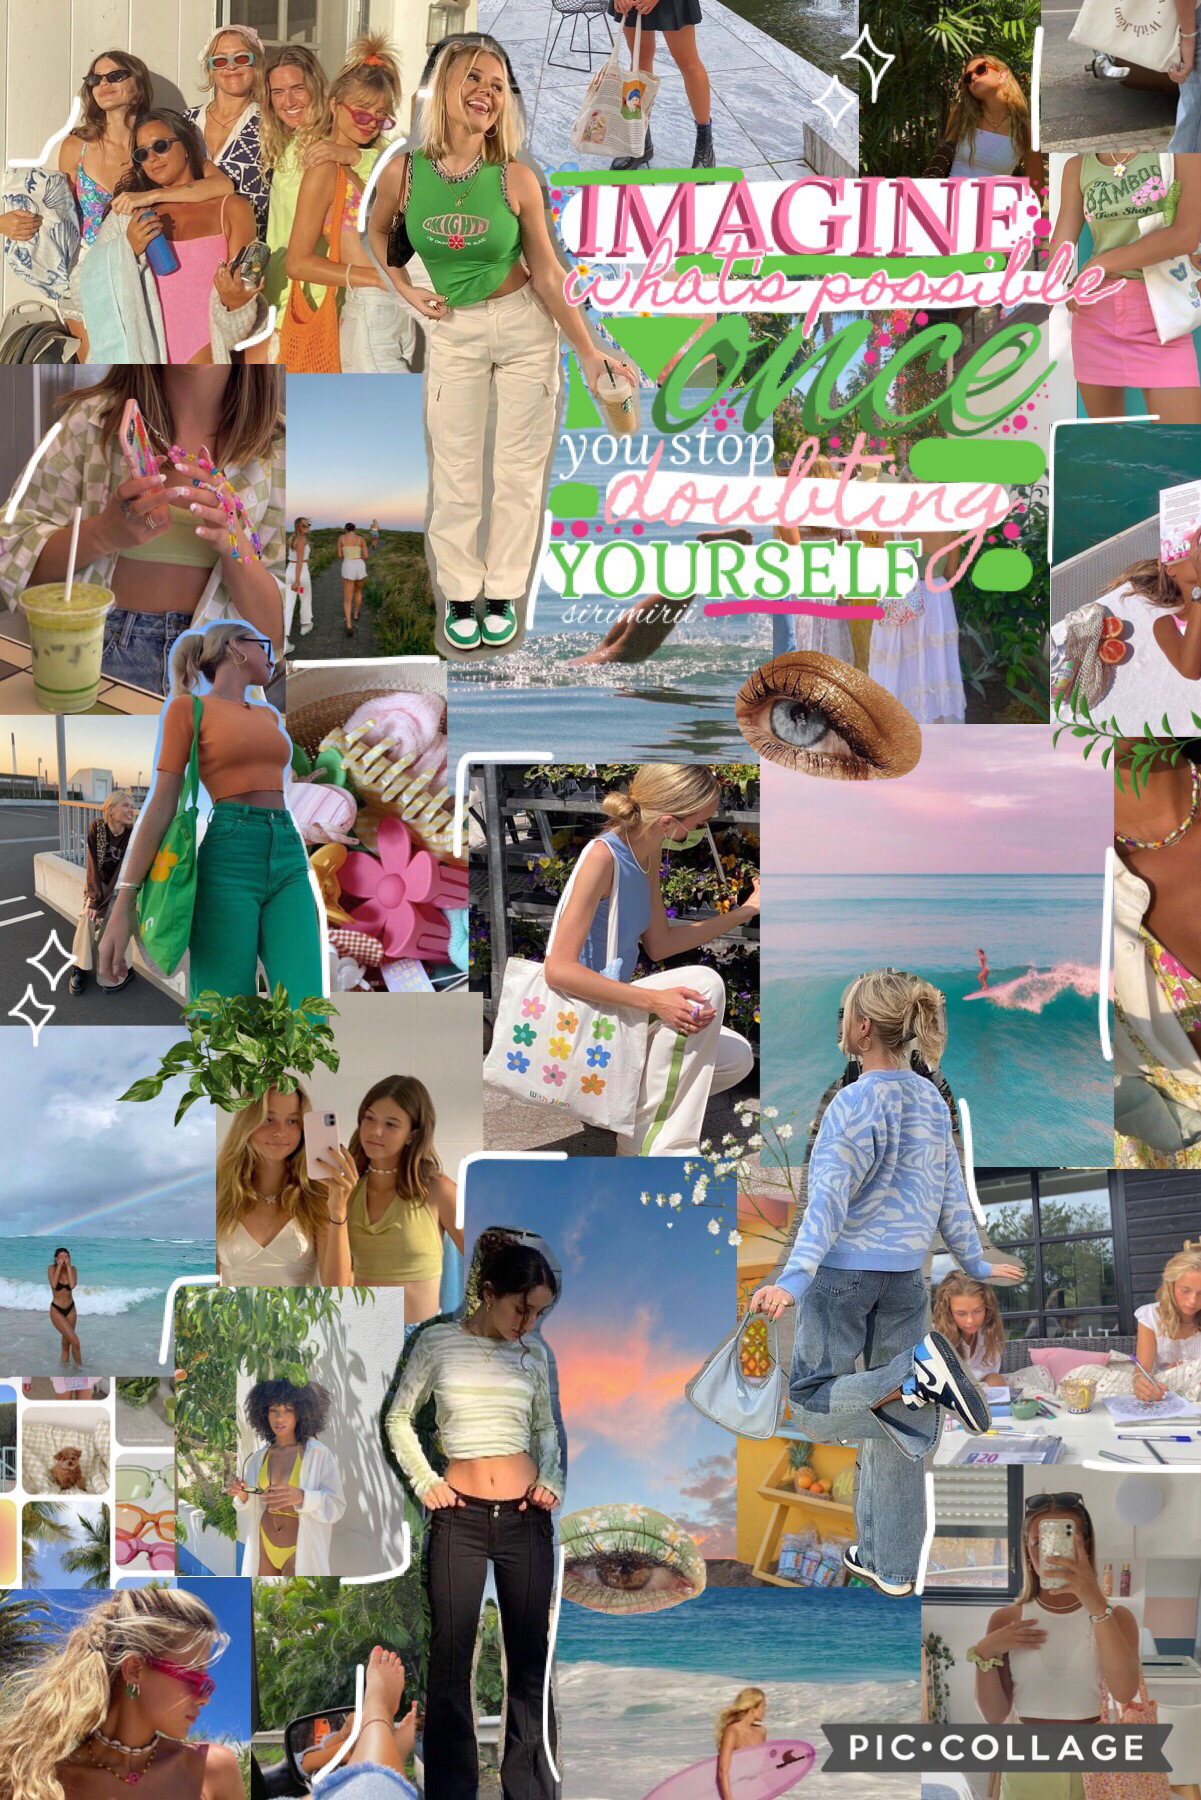 hiiii ppl of pc 🦋🍊🧚🏼ah i haven't posted in so longggg i'm so sorry :((( but i'm loving the coconut girl aesthetic rn!!!!🌺🌿🛼so i wanted to make a collage with that vibeee 🌼🏄🏼‍♀️☁️ 